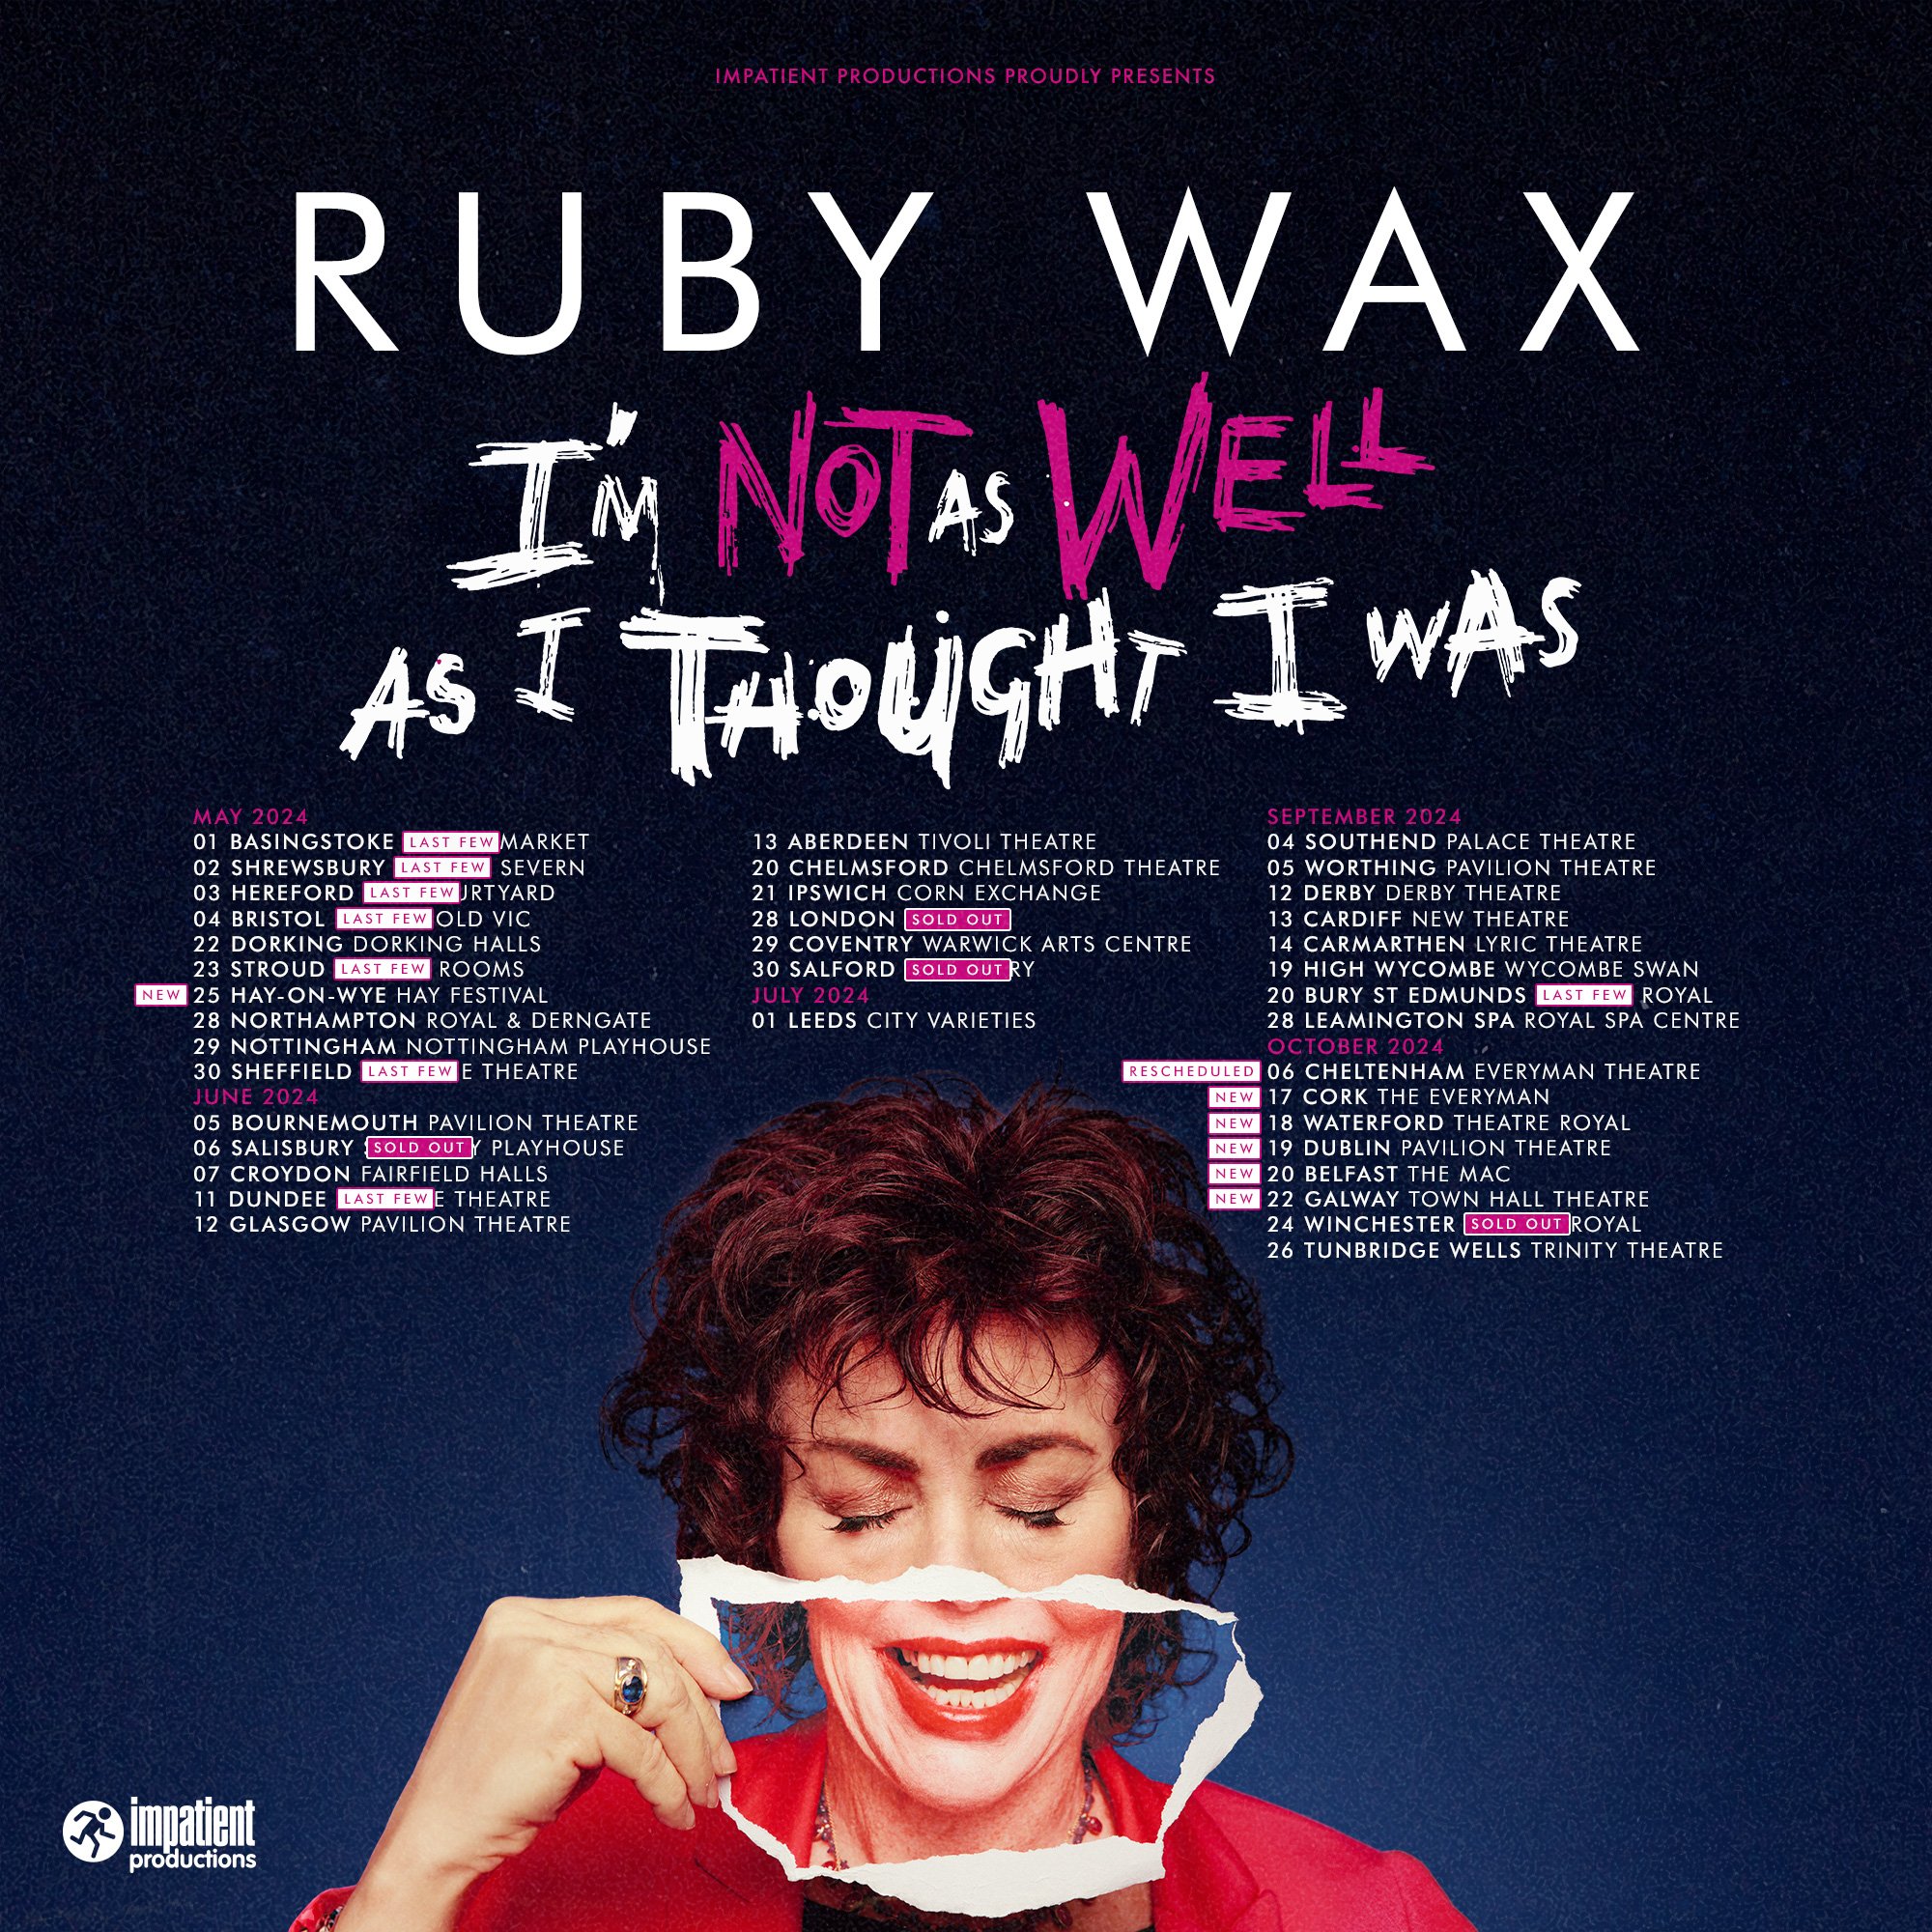 The hilarious @rubywax is back out on tour from next month with her one-woman show, 'I'm Not As Well As I Thought I Was'.

Brand new Ireland dates have been added, and some venues are already starting to sell out - so if you missed her show last year